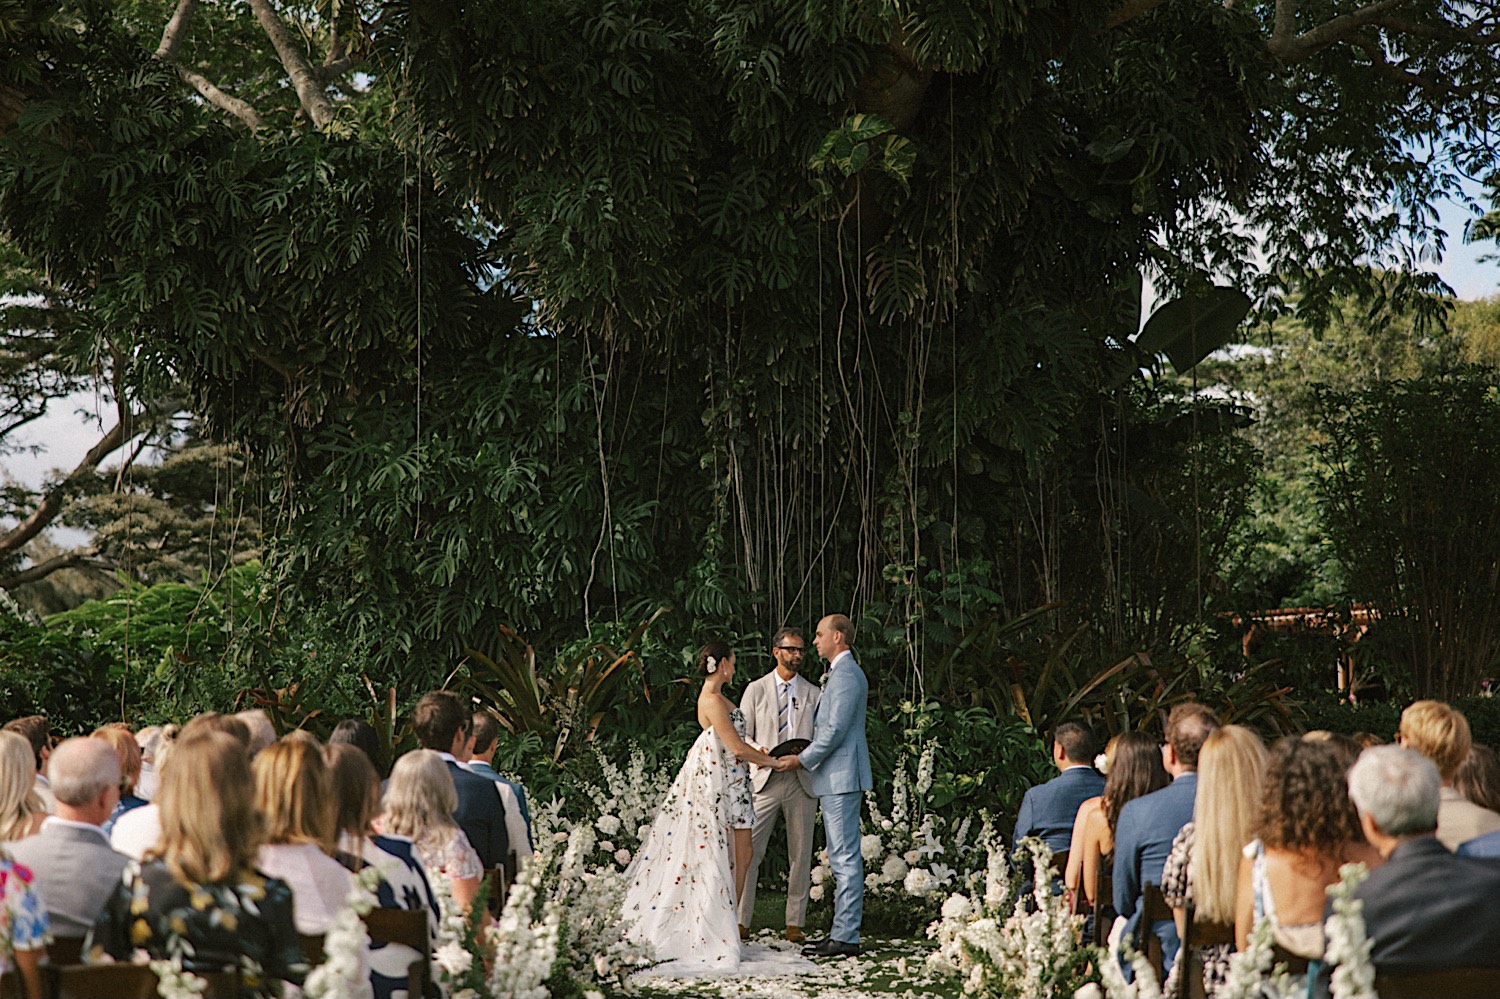 A wedding ceremony space at Kukui'ula on Kauai is decorated with white flowers, guests are seated on either side and the bride and groom hold hands underneath a massive vine covered tree